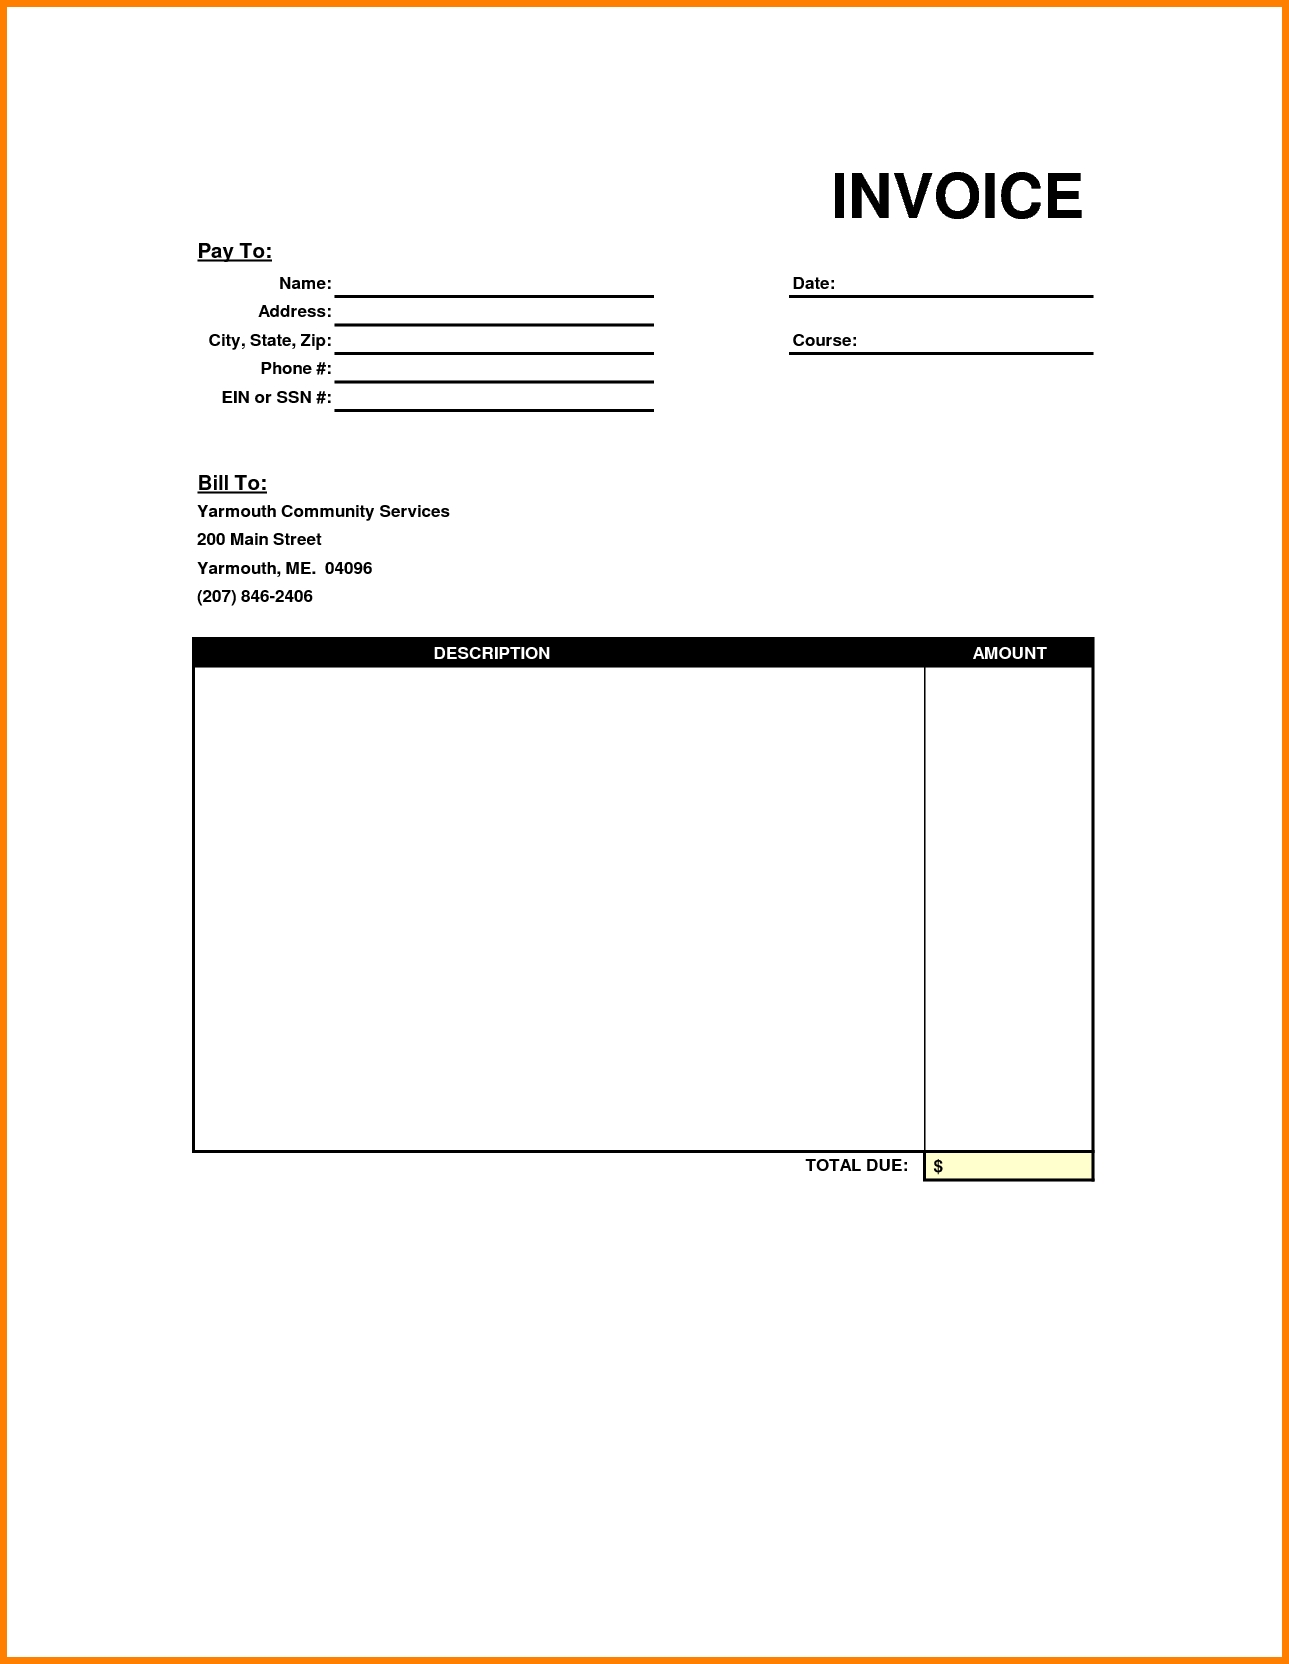 printable invoice template your sourche for printable invoice invoice form pdf